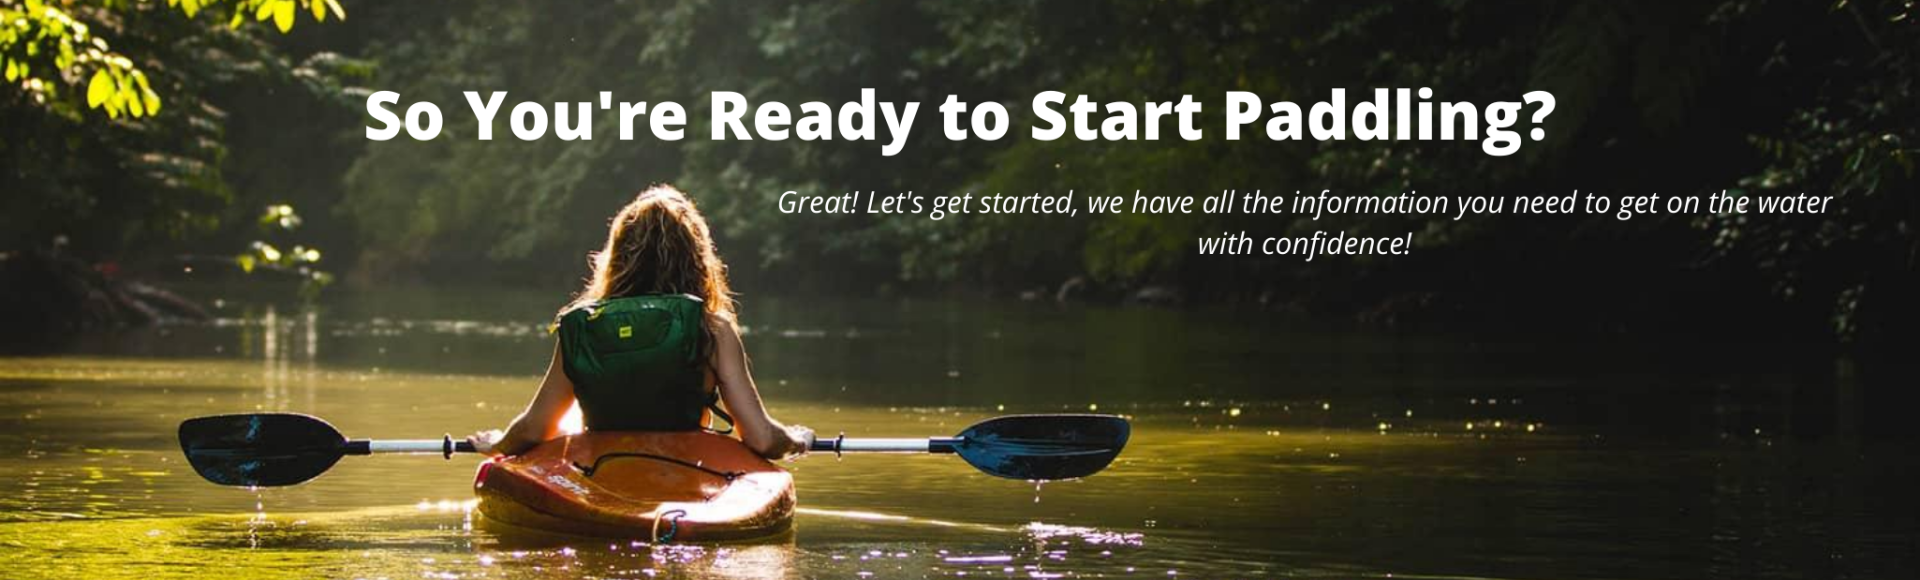 Getting Started Paddling